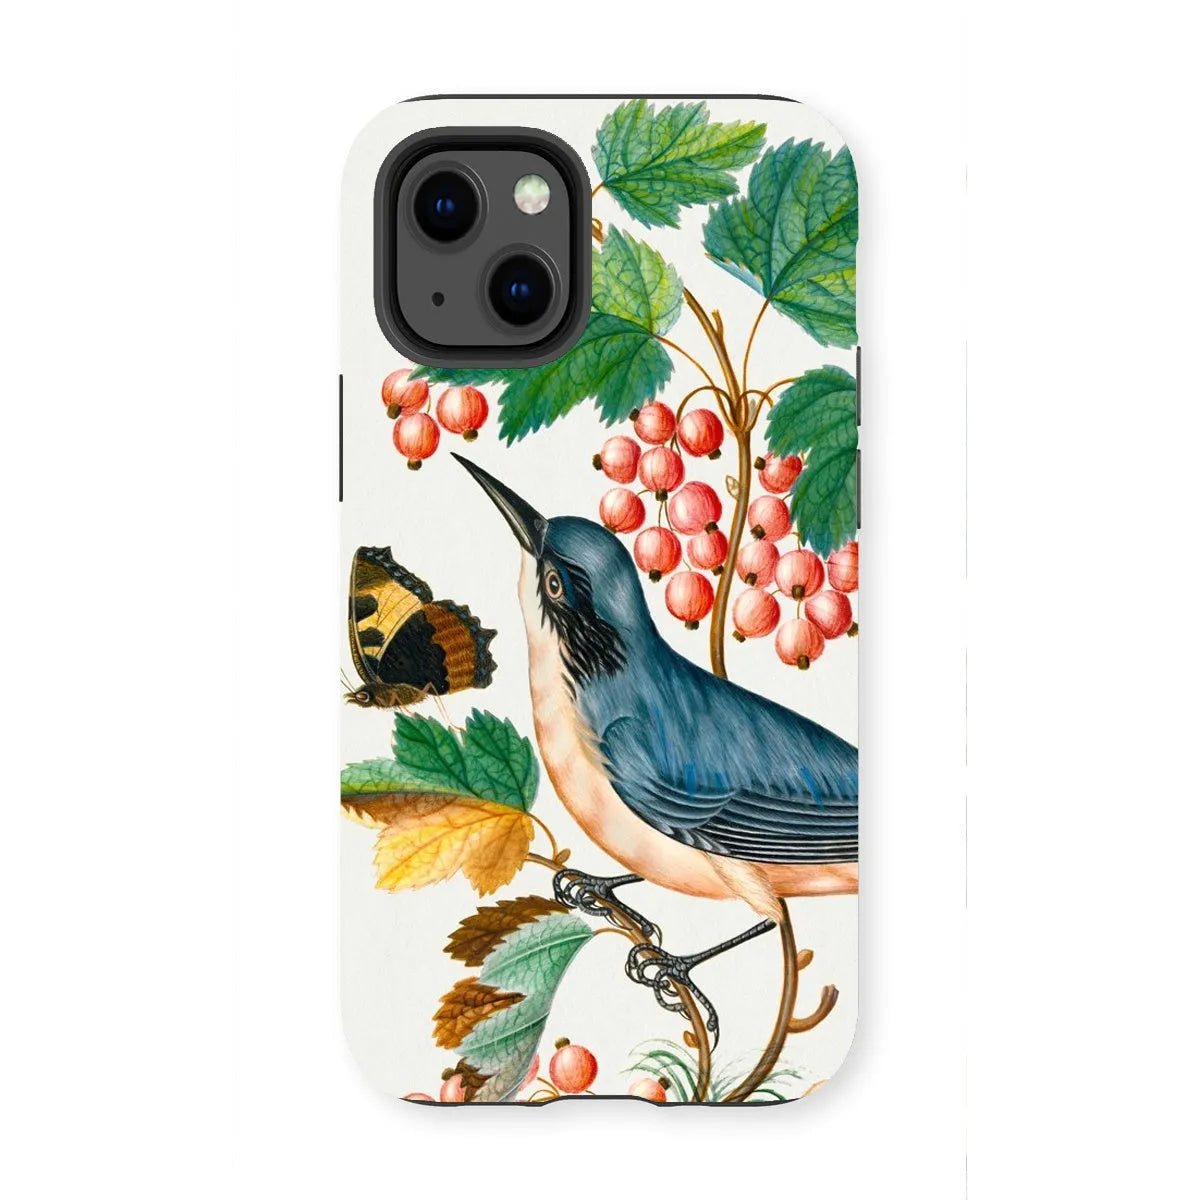 Warbler Admiral Wasps & Ants - Art Phone Case - James Bolton - Iphone 13 Mini / Matte - Mobile Phone Cases - Aesthetic